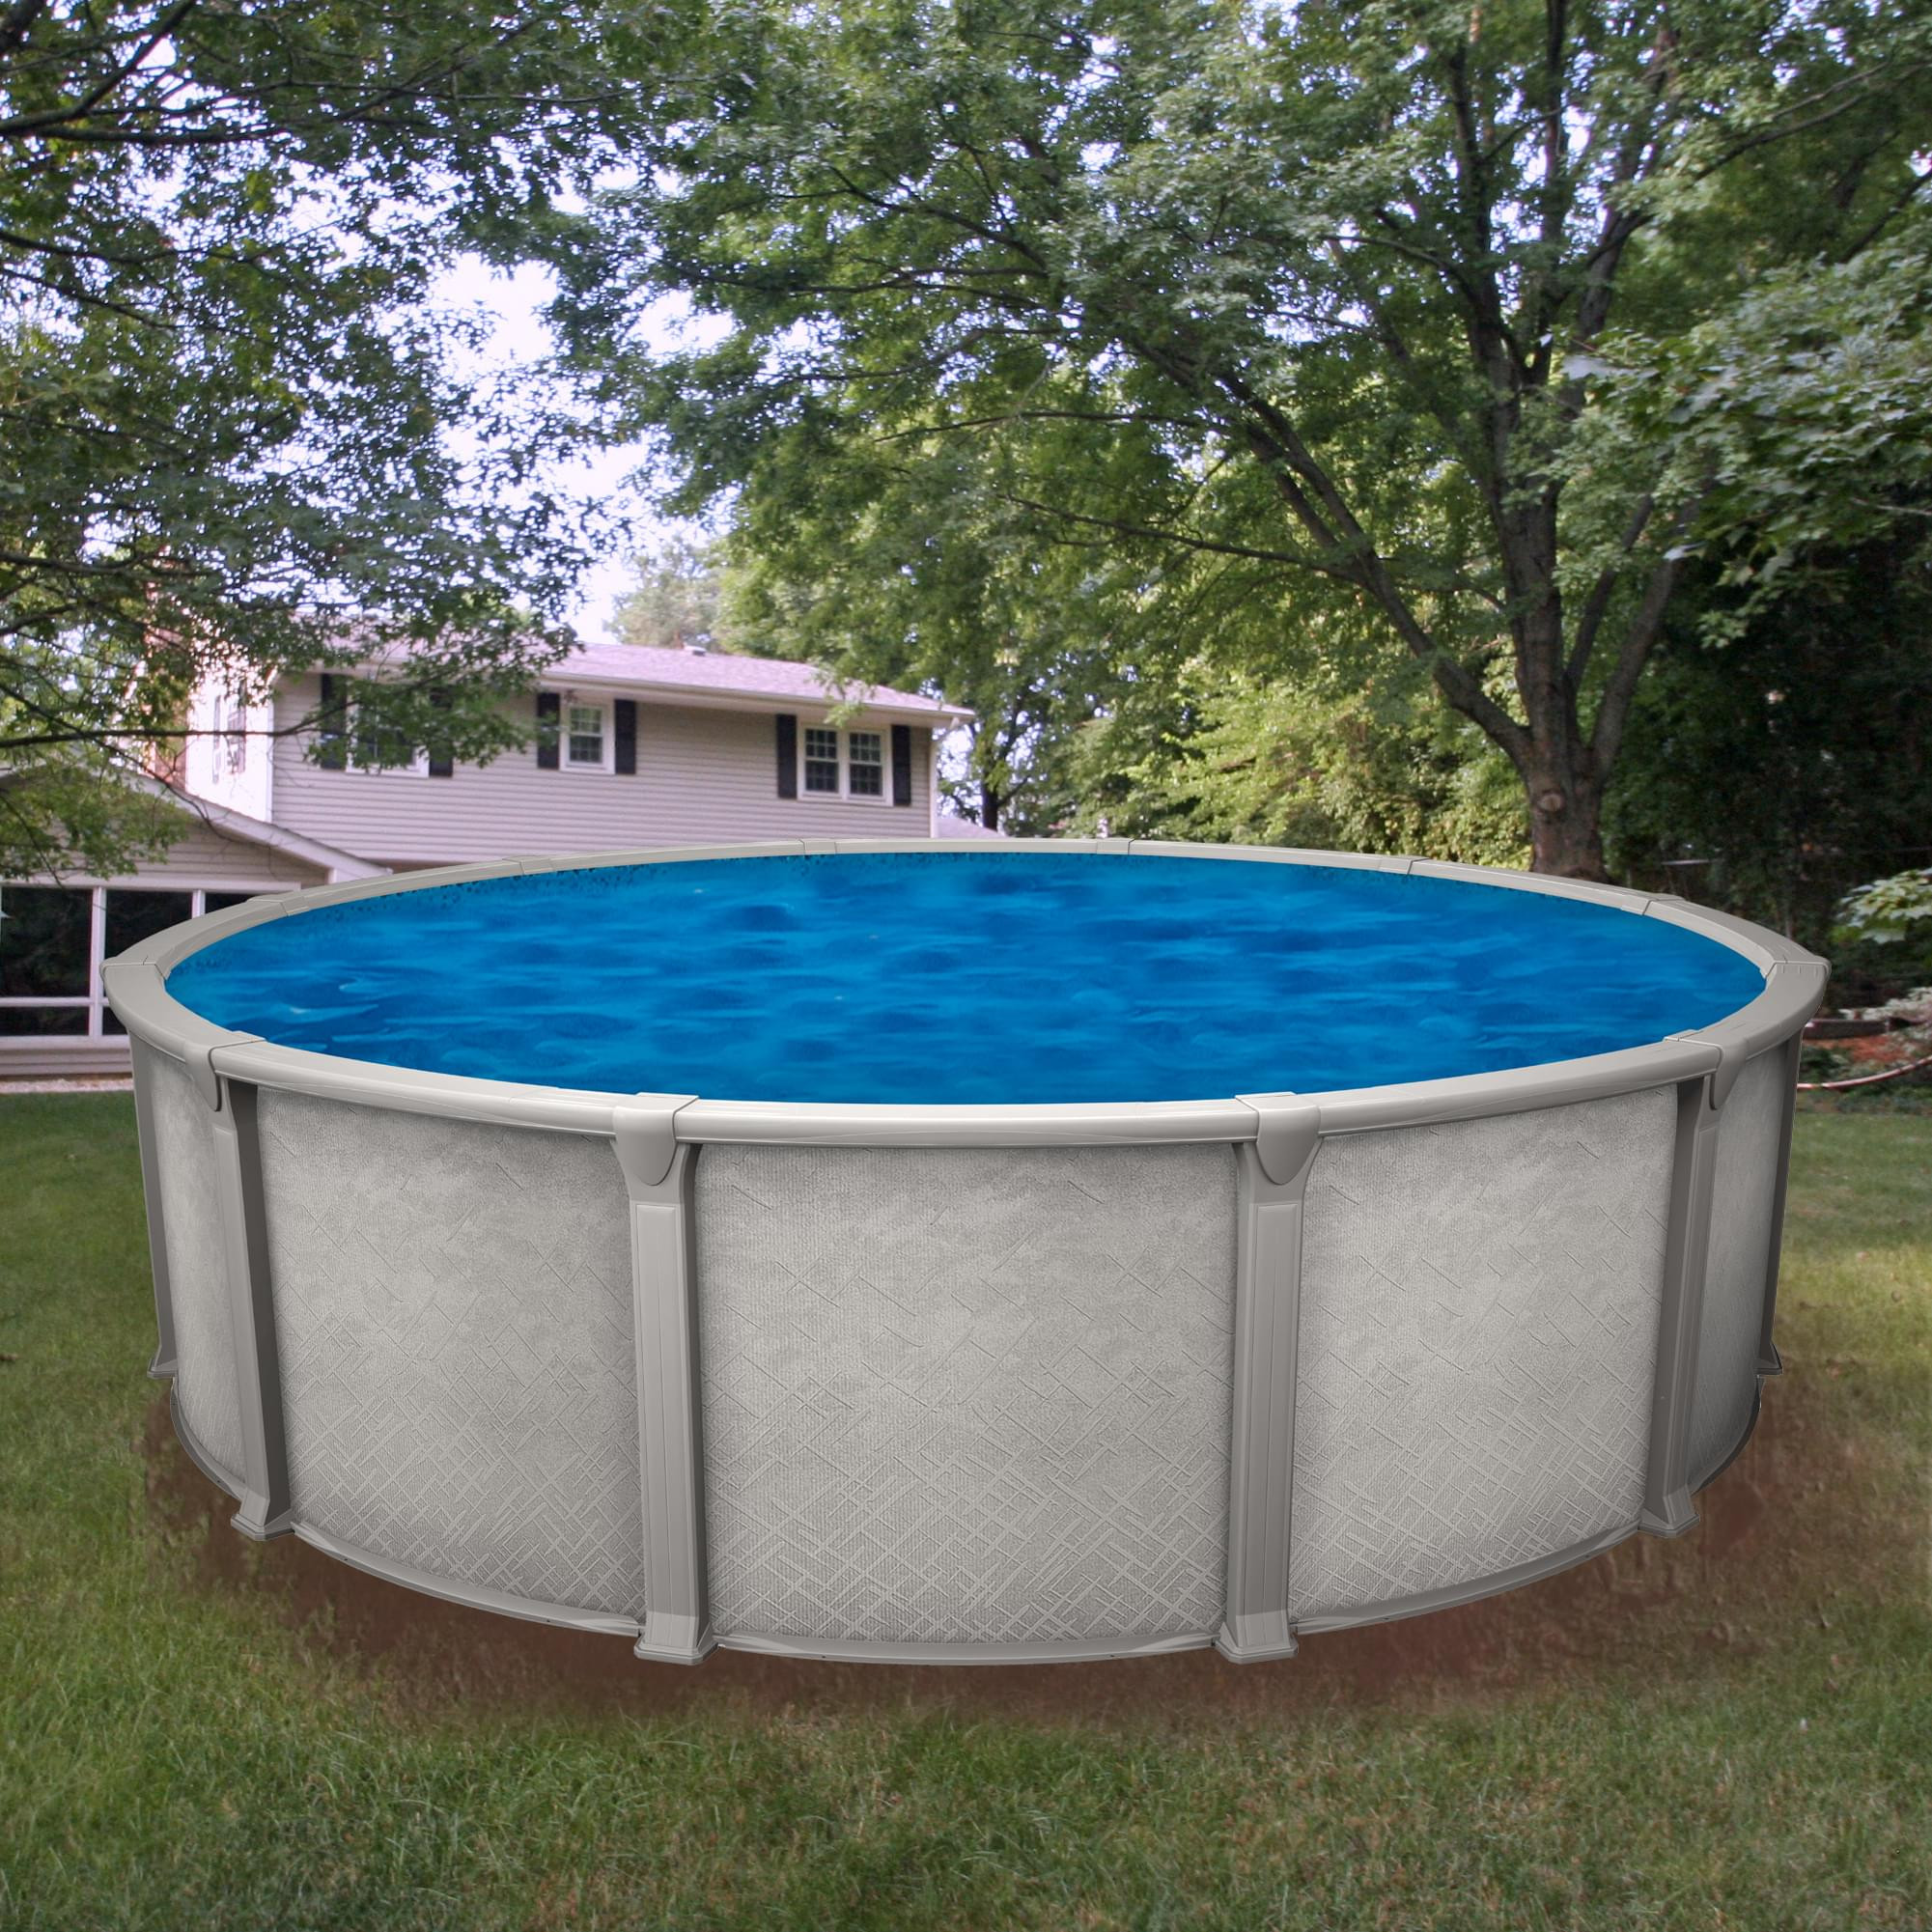 15 Ft Above Ground Pool
 Pool Covers & Rollers Home & Garden Pool Leaf Net